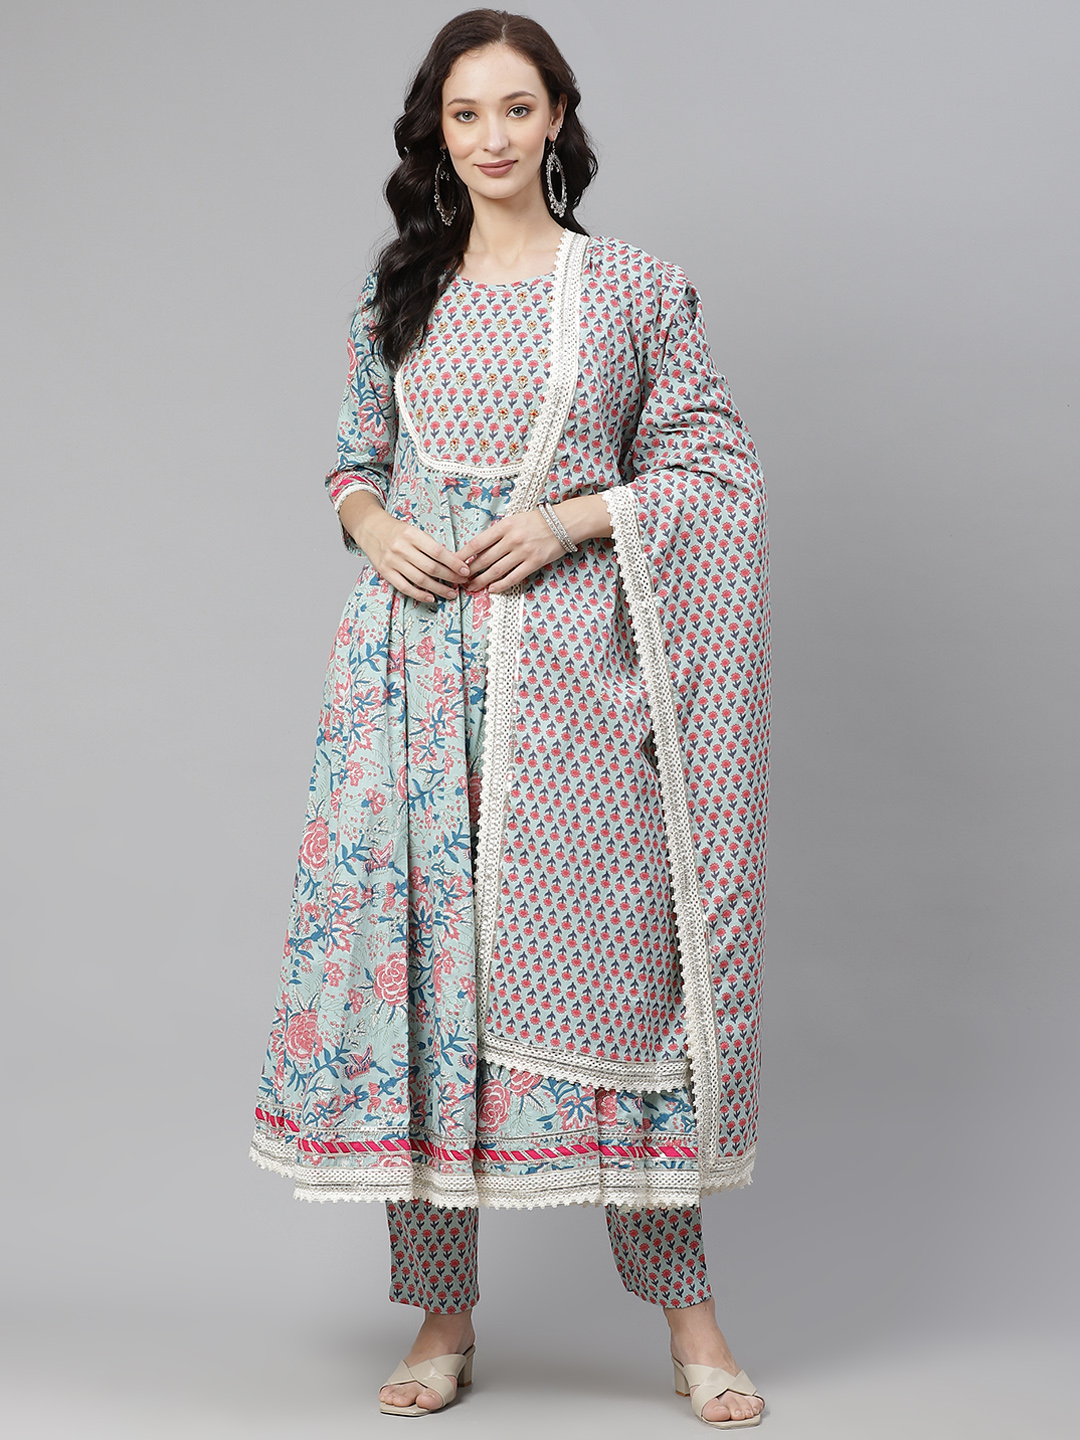 Block Print Afghani Style Suit - Urbanchic Online Fashion Store